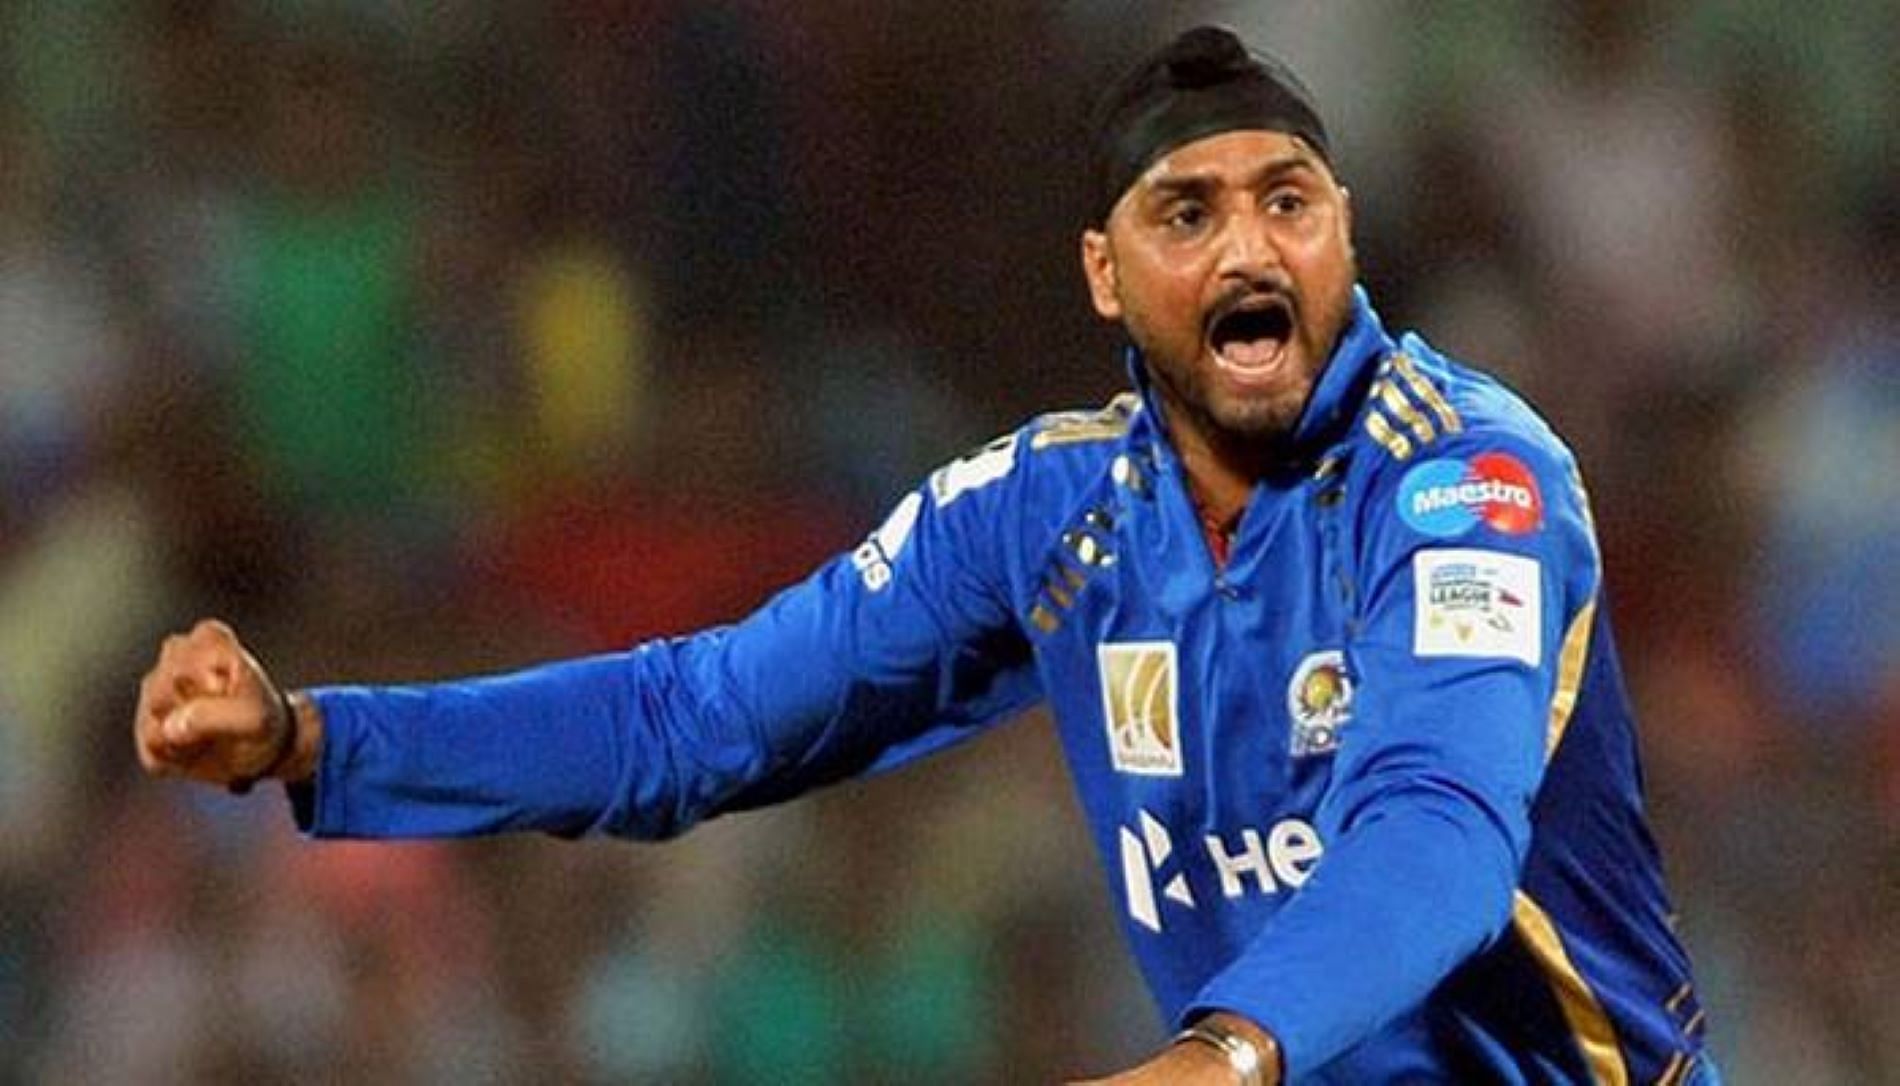 Harbhajan Singh lit up the IPL with match-winning performances for over a decade